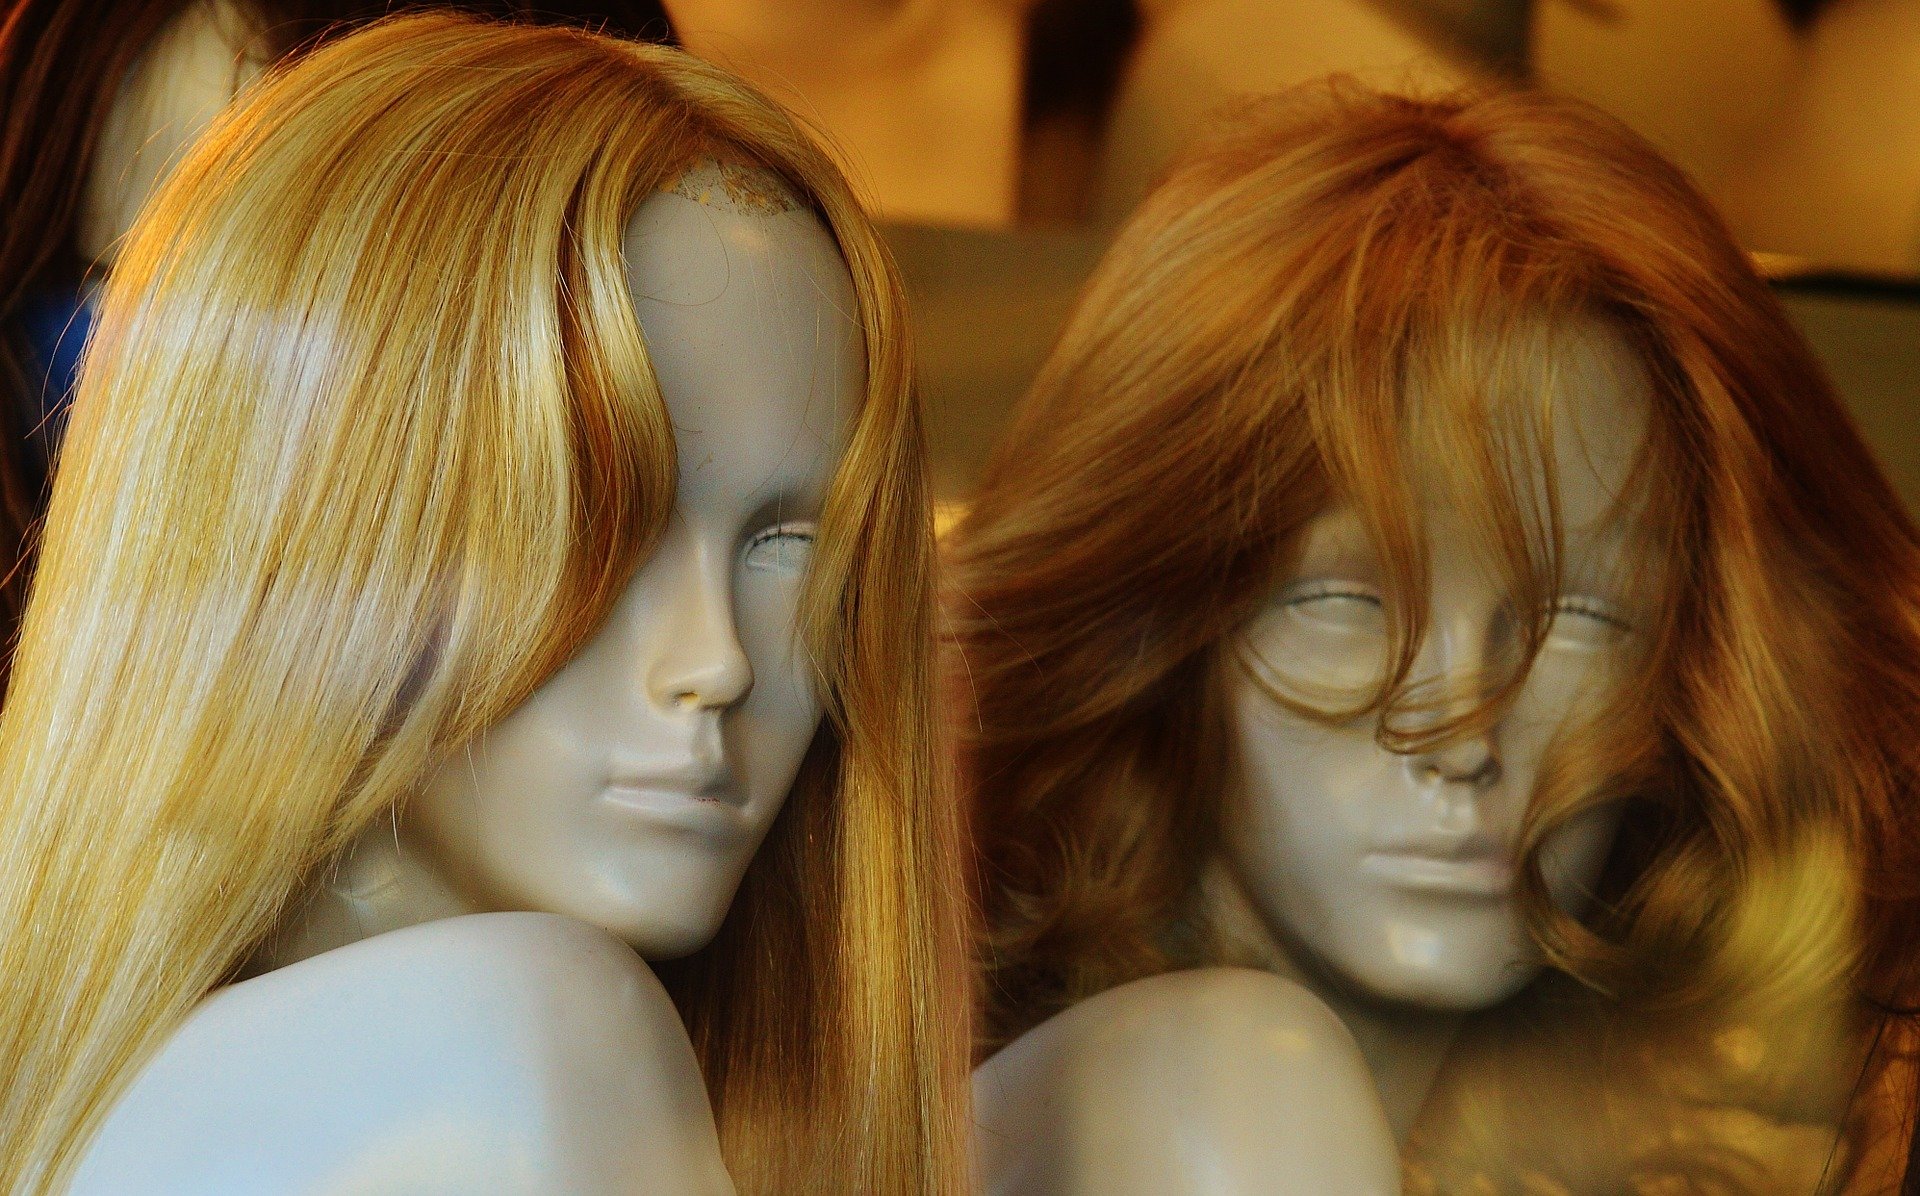 Blonde wigs on two mannequins. | Source: Pixabay